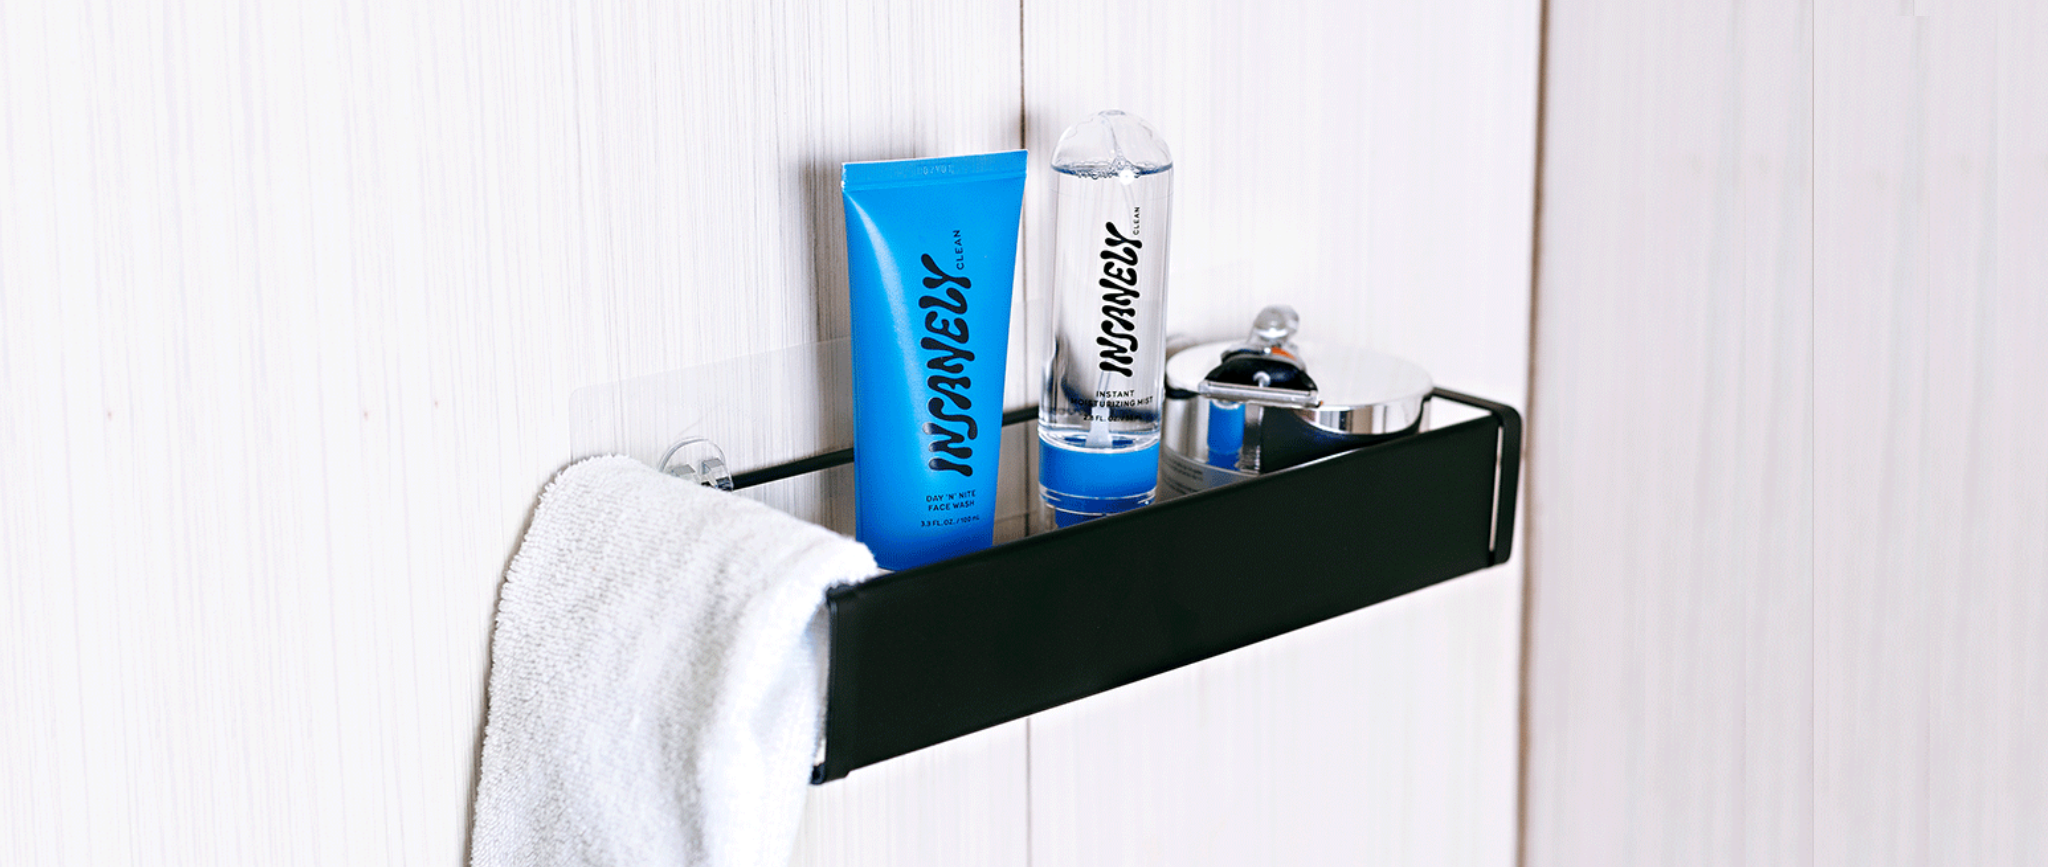 Men's skincare set placed in the bathroom for men to easily use the best natural face wash for men during their shower experience.